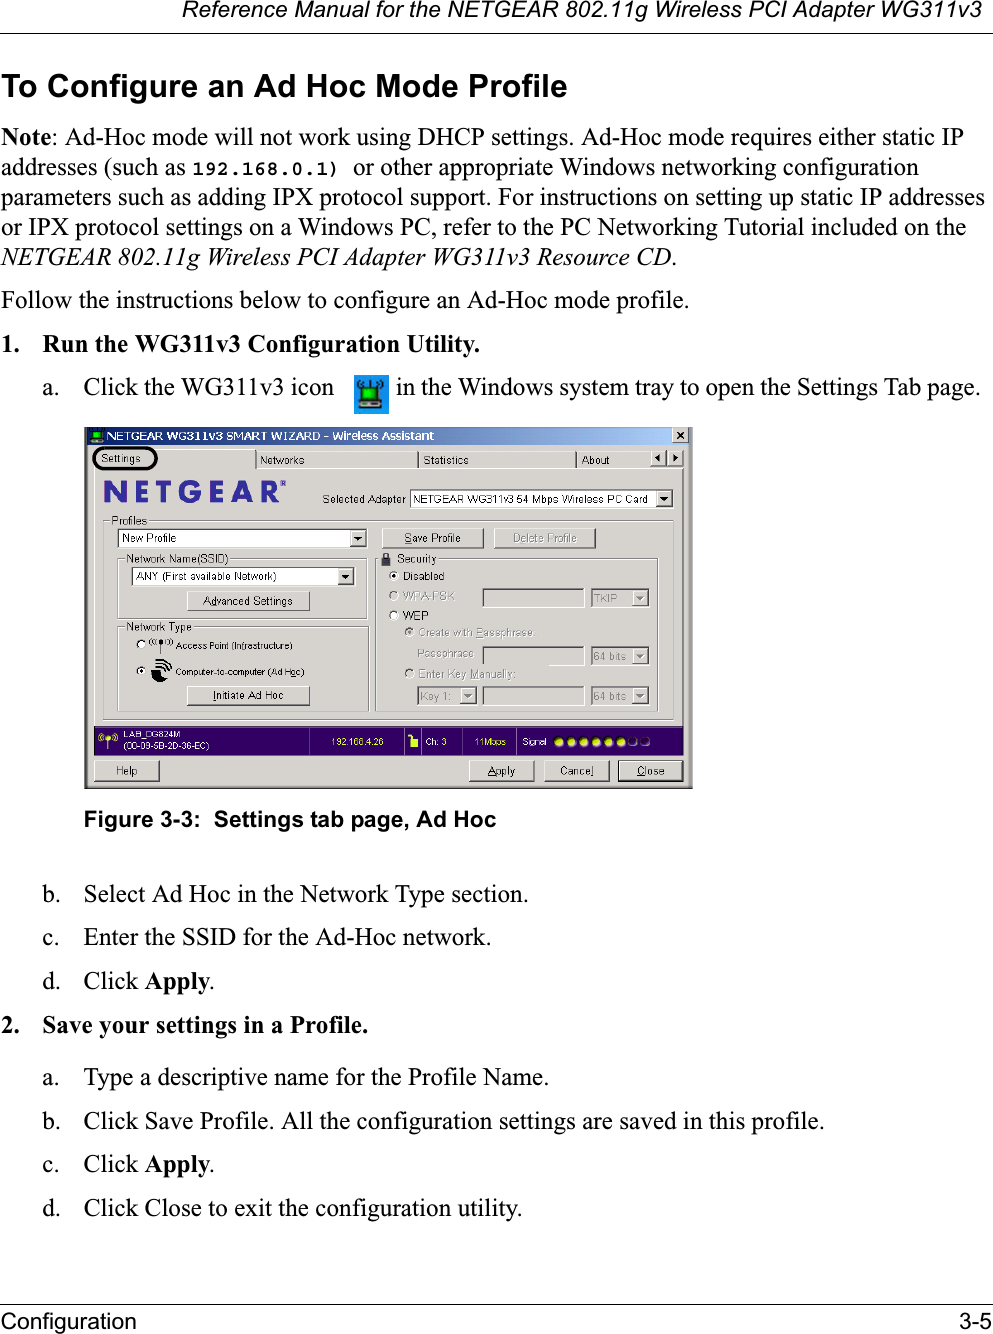 Reference Manual for the NETGEAR 802.11g Wireless PCI Adapter WG311v3Configuration 3-5To Configure an Ad Hoc Mode ProfileNote: Ad-Hoc mode will not work using DHCP settings. Ad-Hoc mode requires either static IP addresses (such as 192.168.0.1) or other appropriate Windows networking configuration parameters such as adding IPX protocol support. For instructions on setting up static IP addresses or IPX protocol settings on a Windows PC, refer to the PC Networking Tutorial included on the NETGEAR 802.11g Wireless PCI Adapter WG311v3 Resource CD.Follow the instructions below to configure an Ad-Hoc mode profile.1. Run the WG311v3 Configuration Utility.a. Click the WG311v3 icon  in the Windows system tray to open the Settings Tab page. Figure 3-3:  Settings tab page, Ad Hocb. Select Ad Hoc in the Network Type section.c. Enter the SSID for the Ad-Hoc network.d. Click Apply.2. Save your settings in a Profile. a. Type a descriptive name for the Profile Name. b. Click Save Profile. All the configuration settings are saved in this profile. c. Click Apply.d. Click Close to exit the configuration utility.